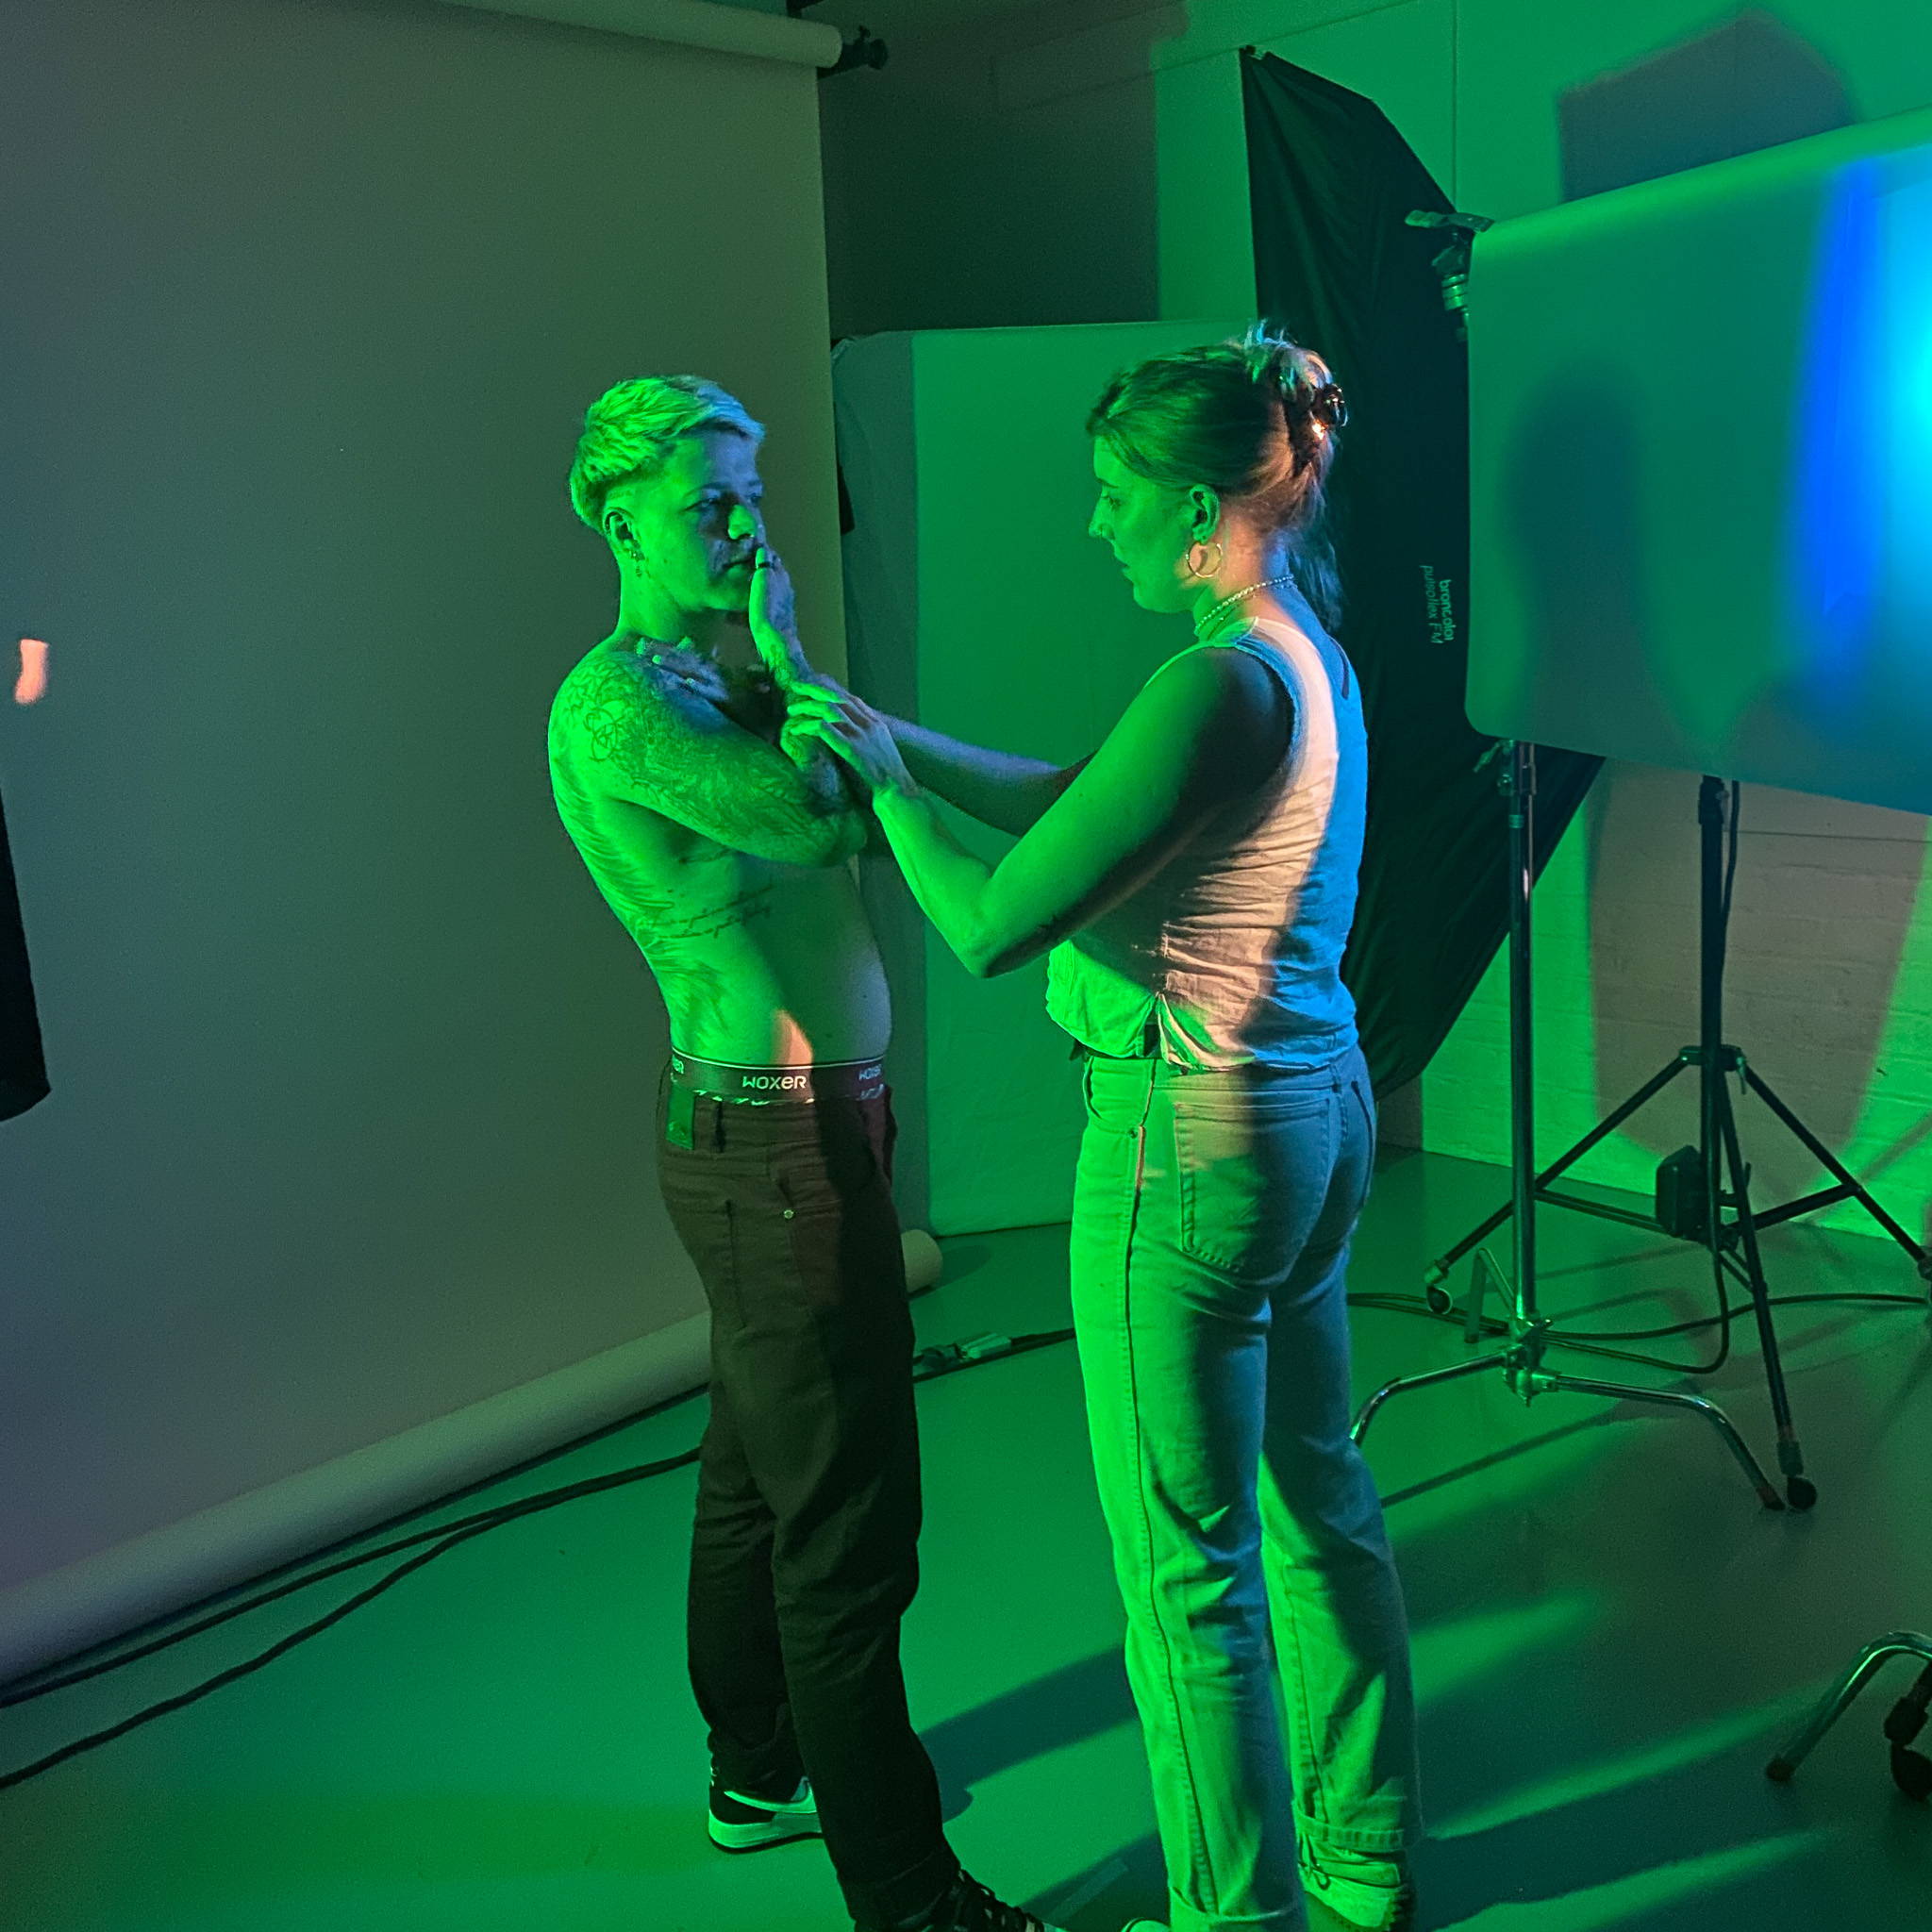 Model TJ stands topless to the left of the image facing stylist Jessie who is holding their arm in pose. They are both bathed in green and blue lighting and in the background we can see a large white photography backdrop, lighting equipment and tripods. 